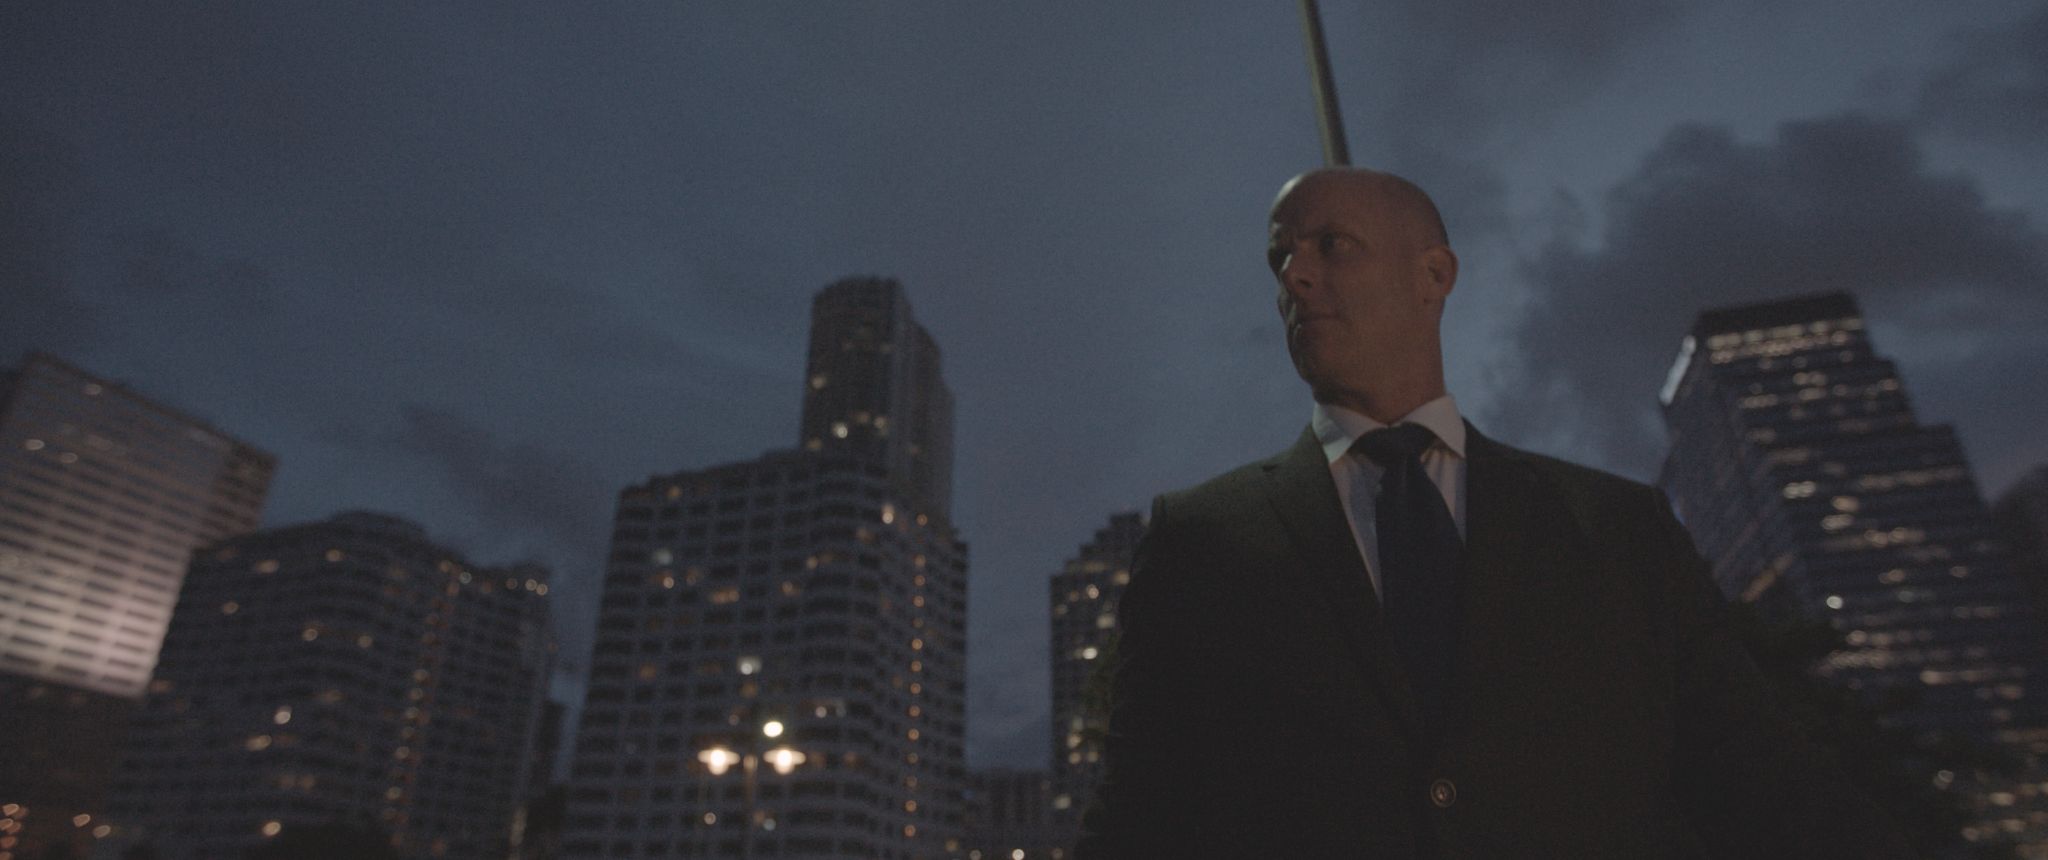 View looking up at a man dressed in a suit with the city in the background